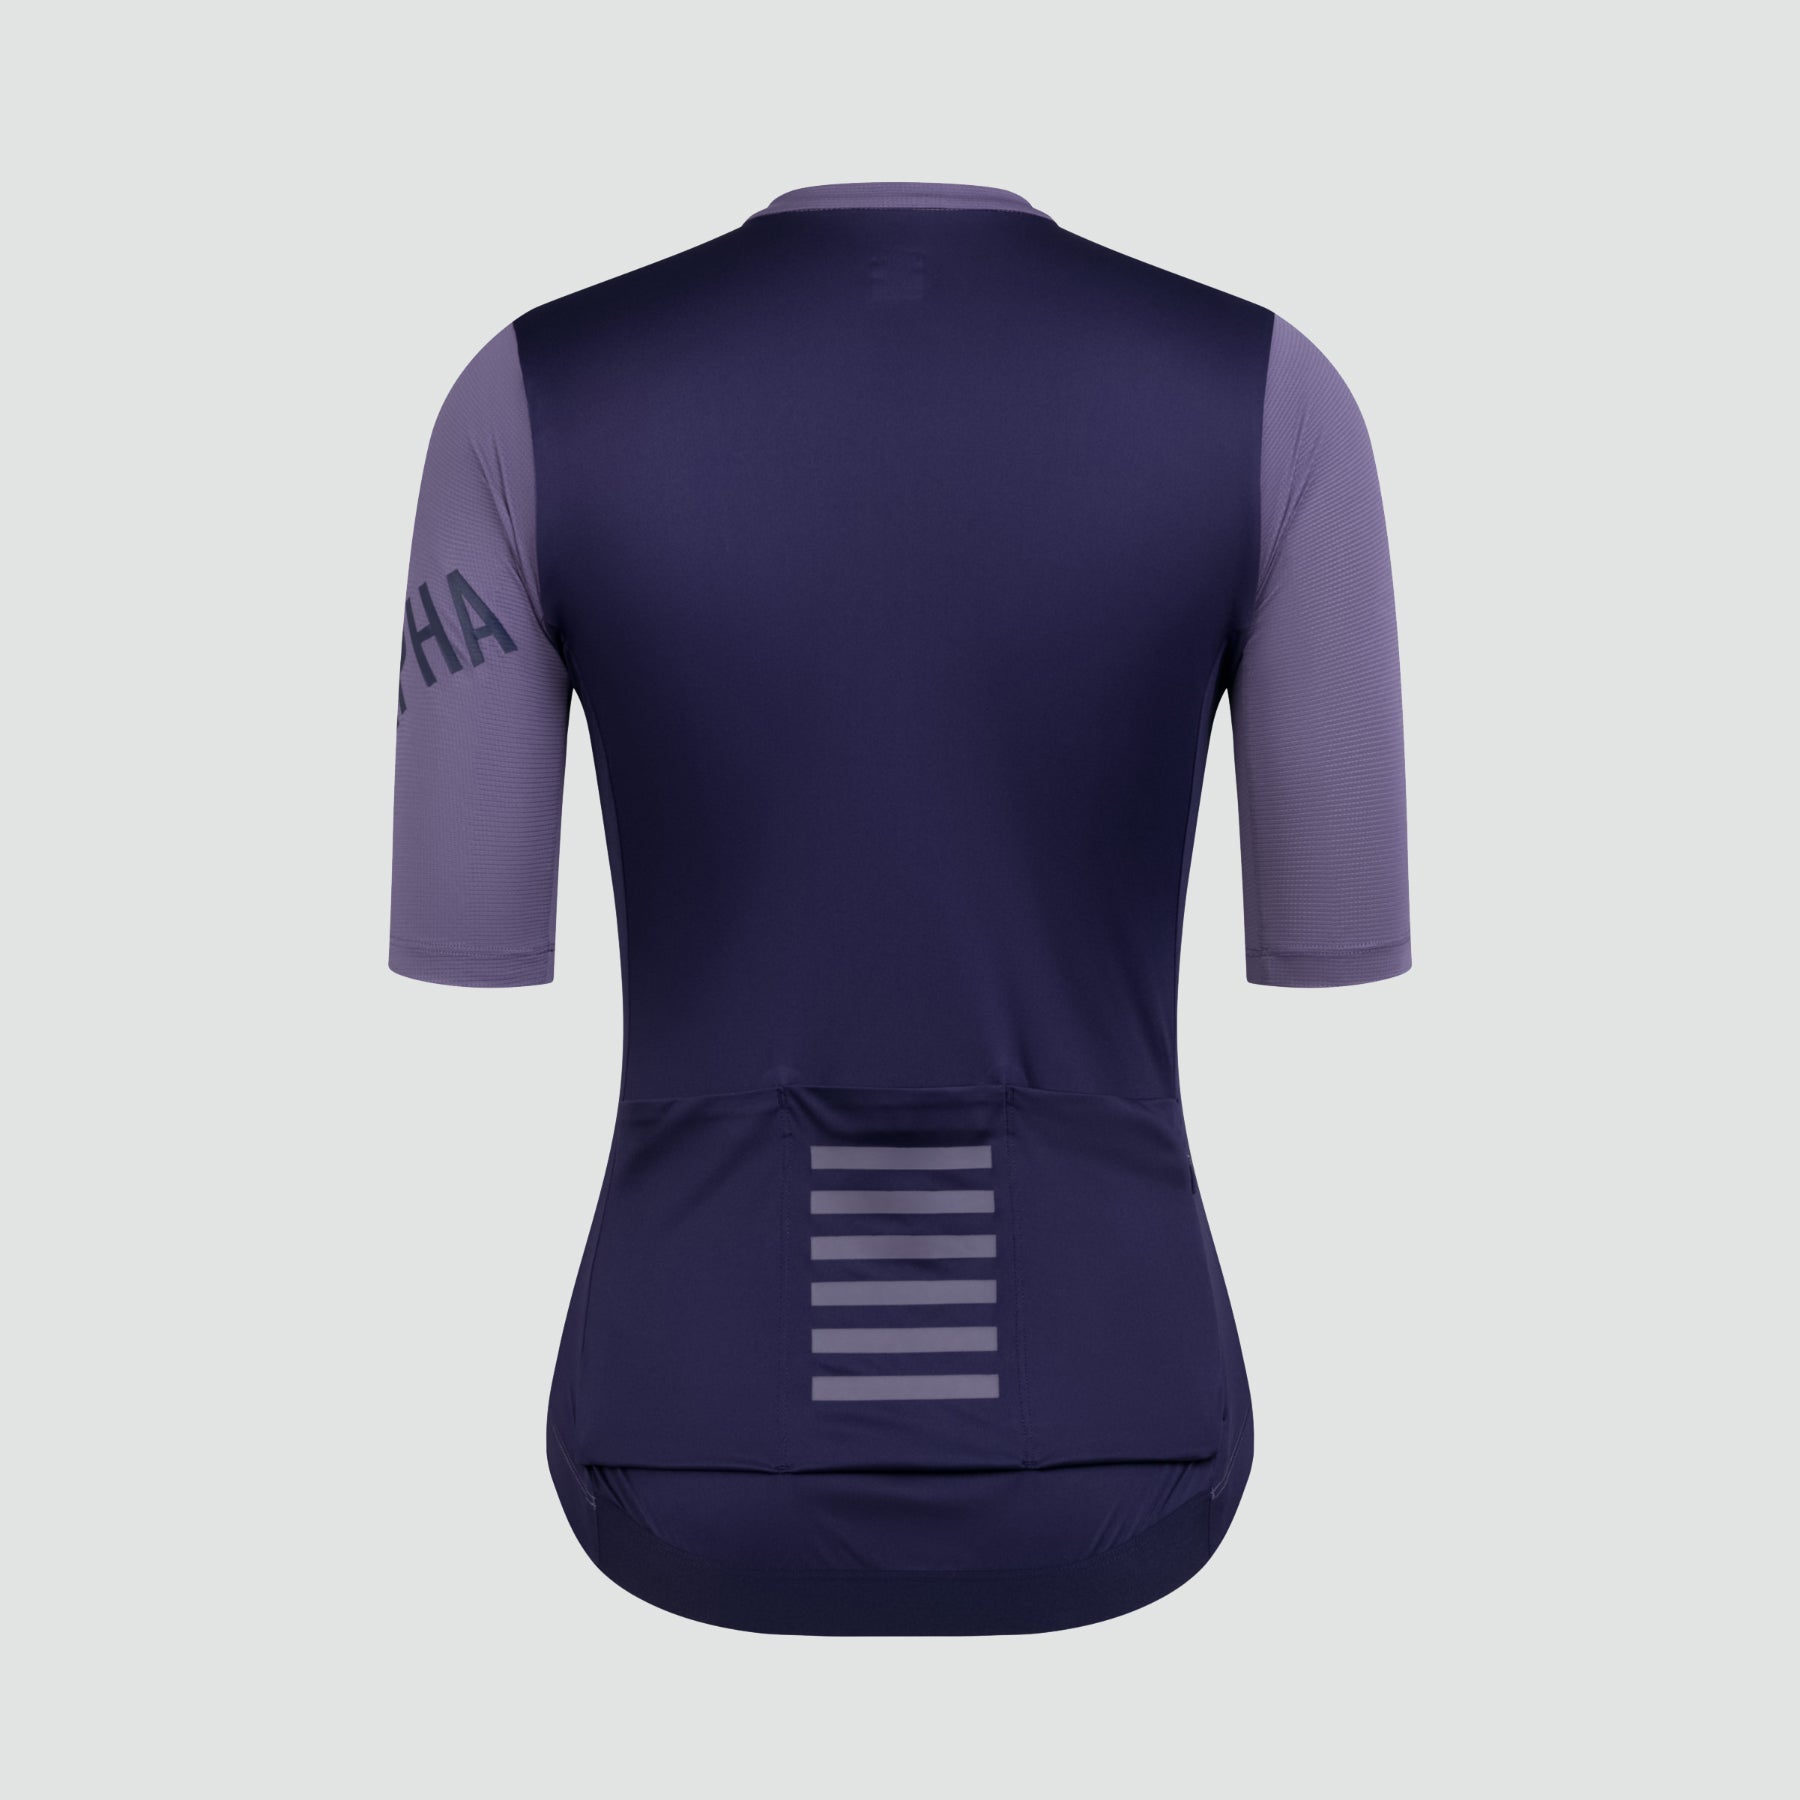 Maillot Pro Team Training Femme - Dusted Lilac/Navy Purple